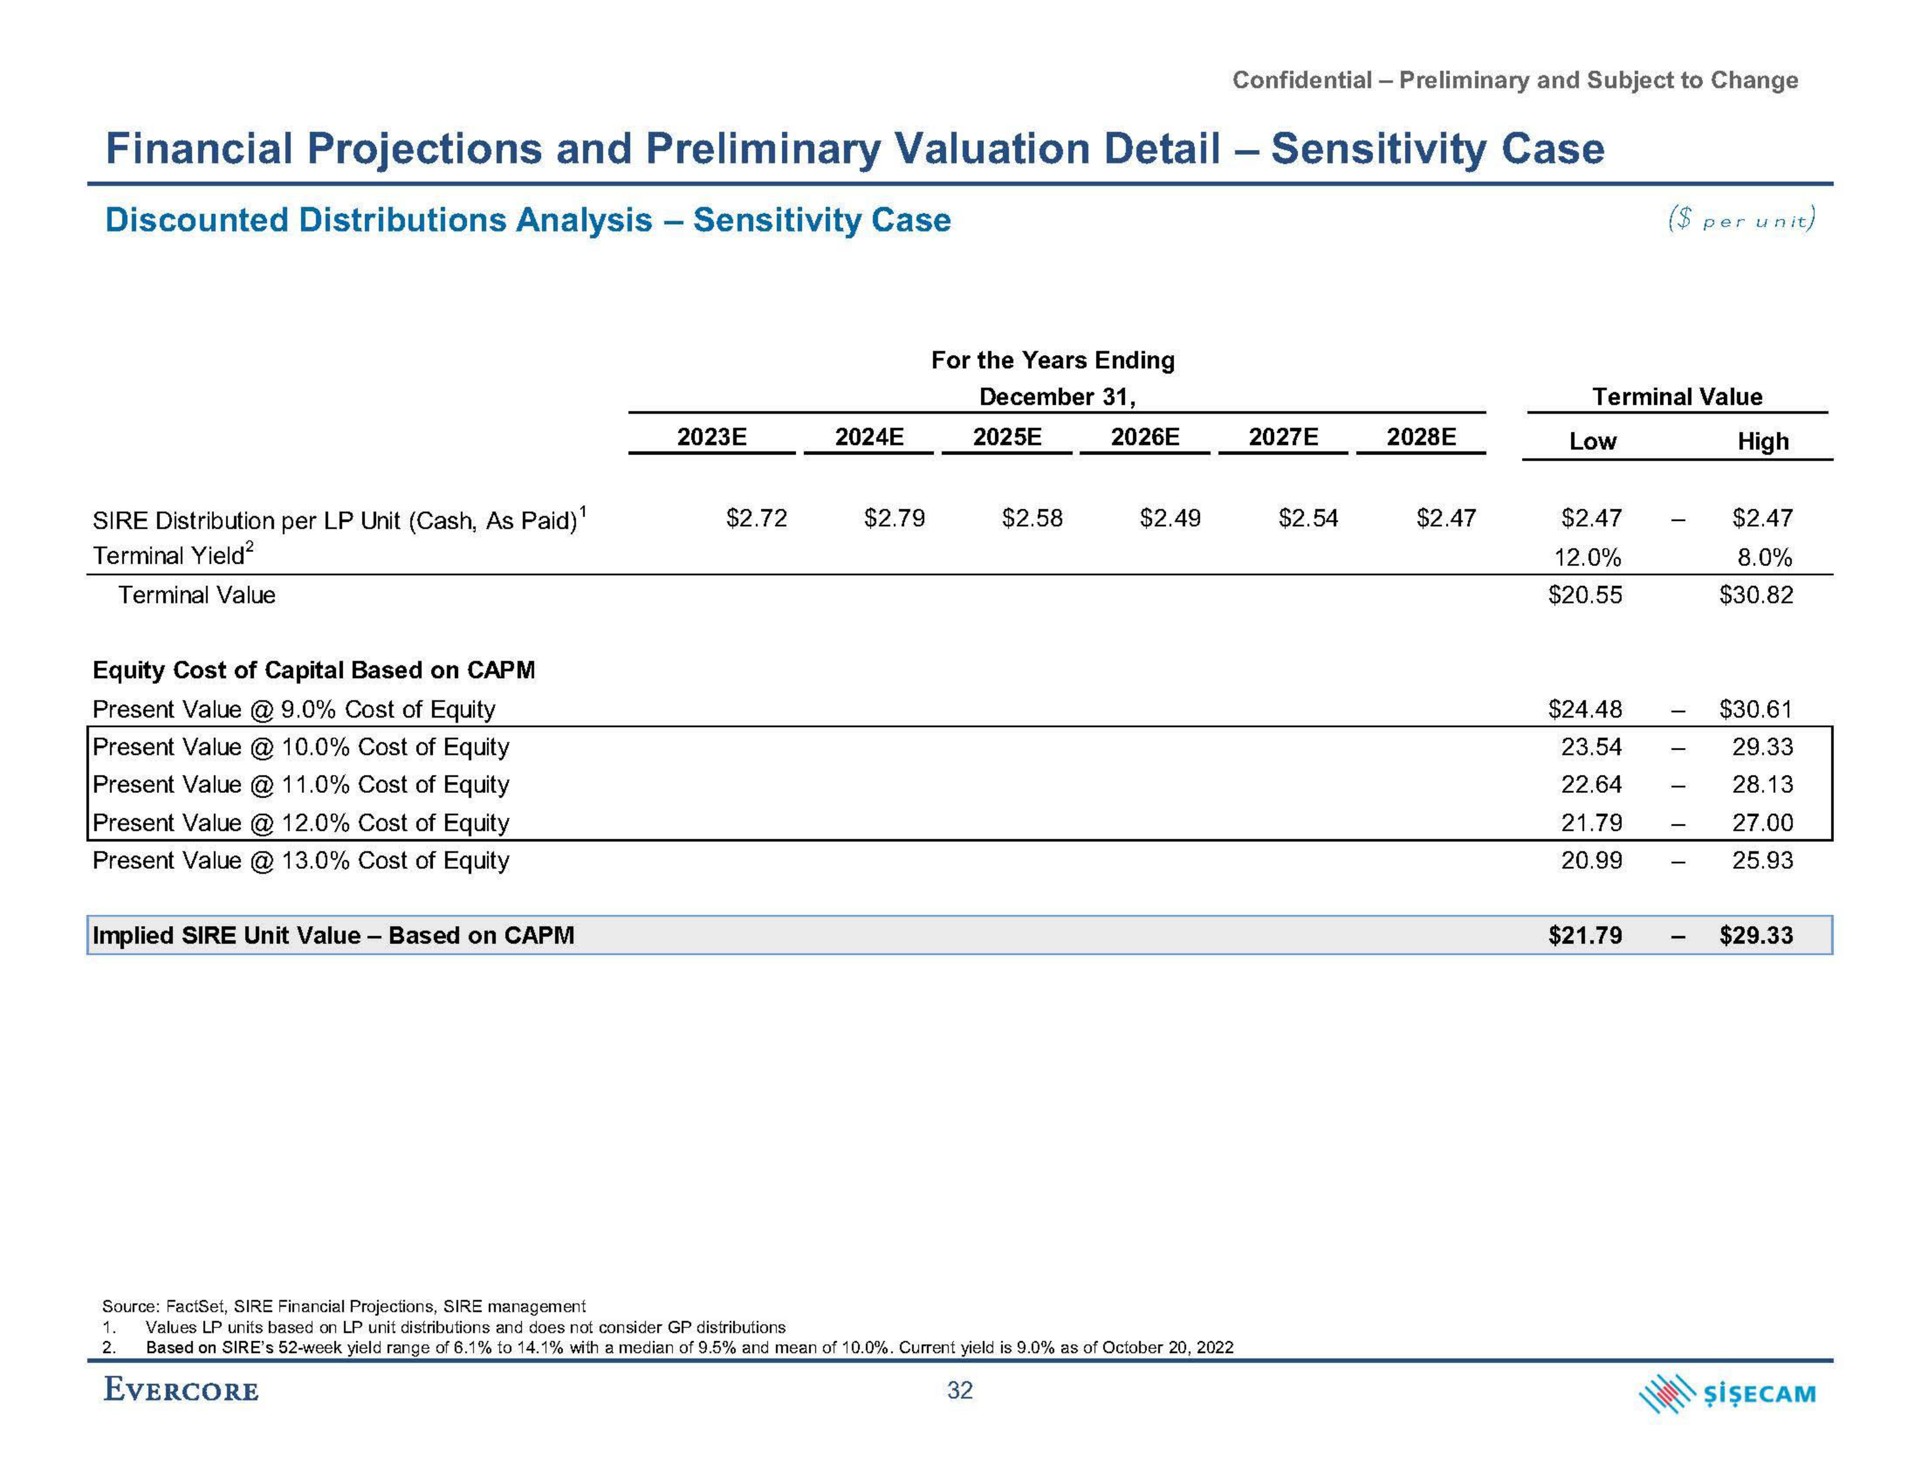 financial projections and preliminary valuation detail sensitivity case discounted distributions analysis sensitivity case per unit low high | Evercore